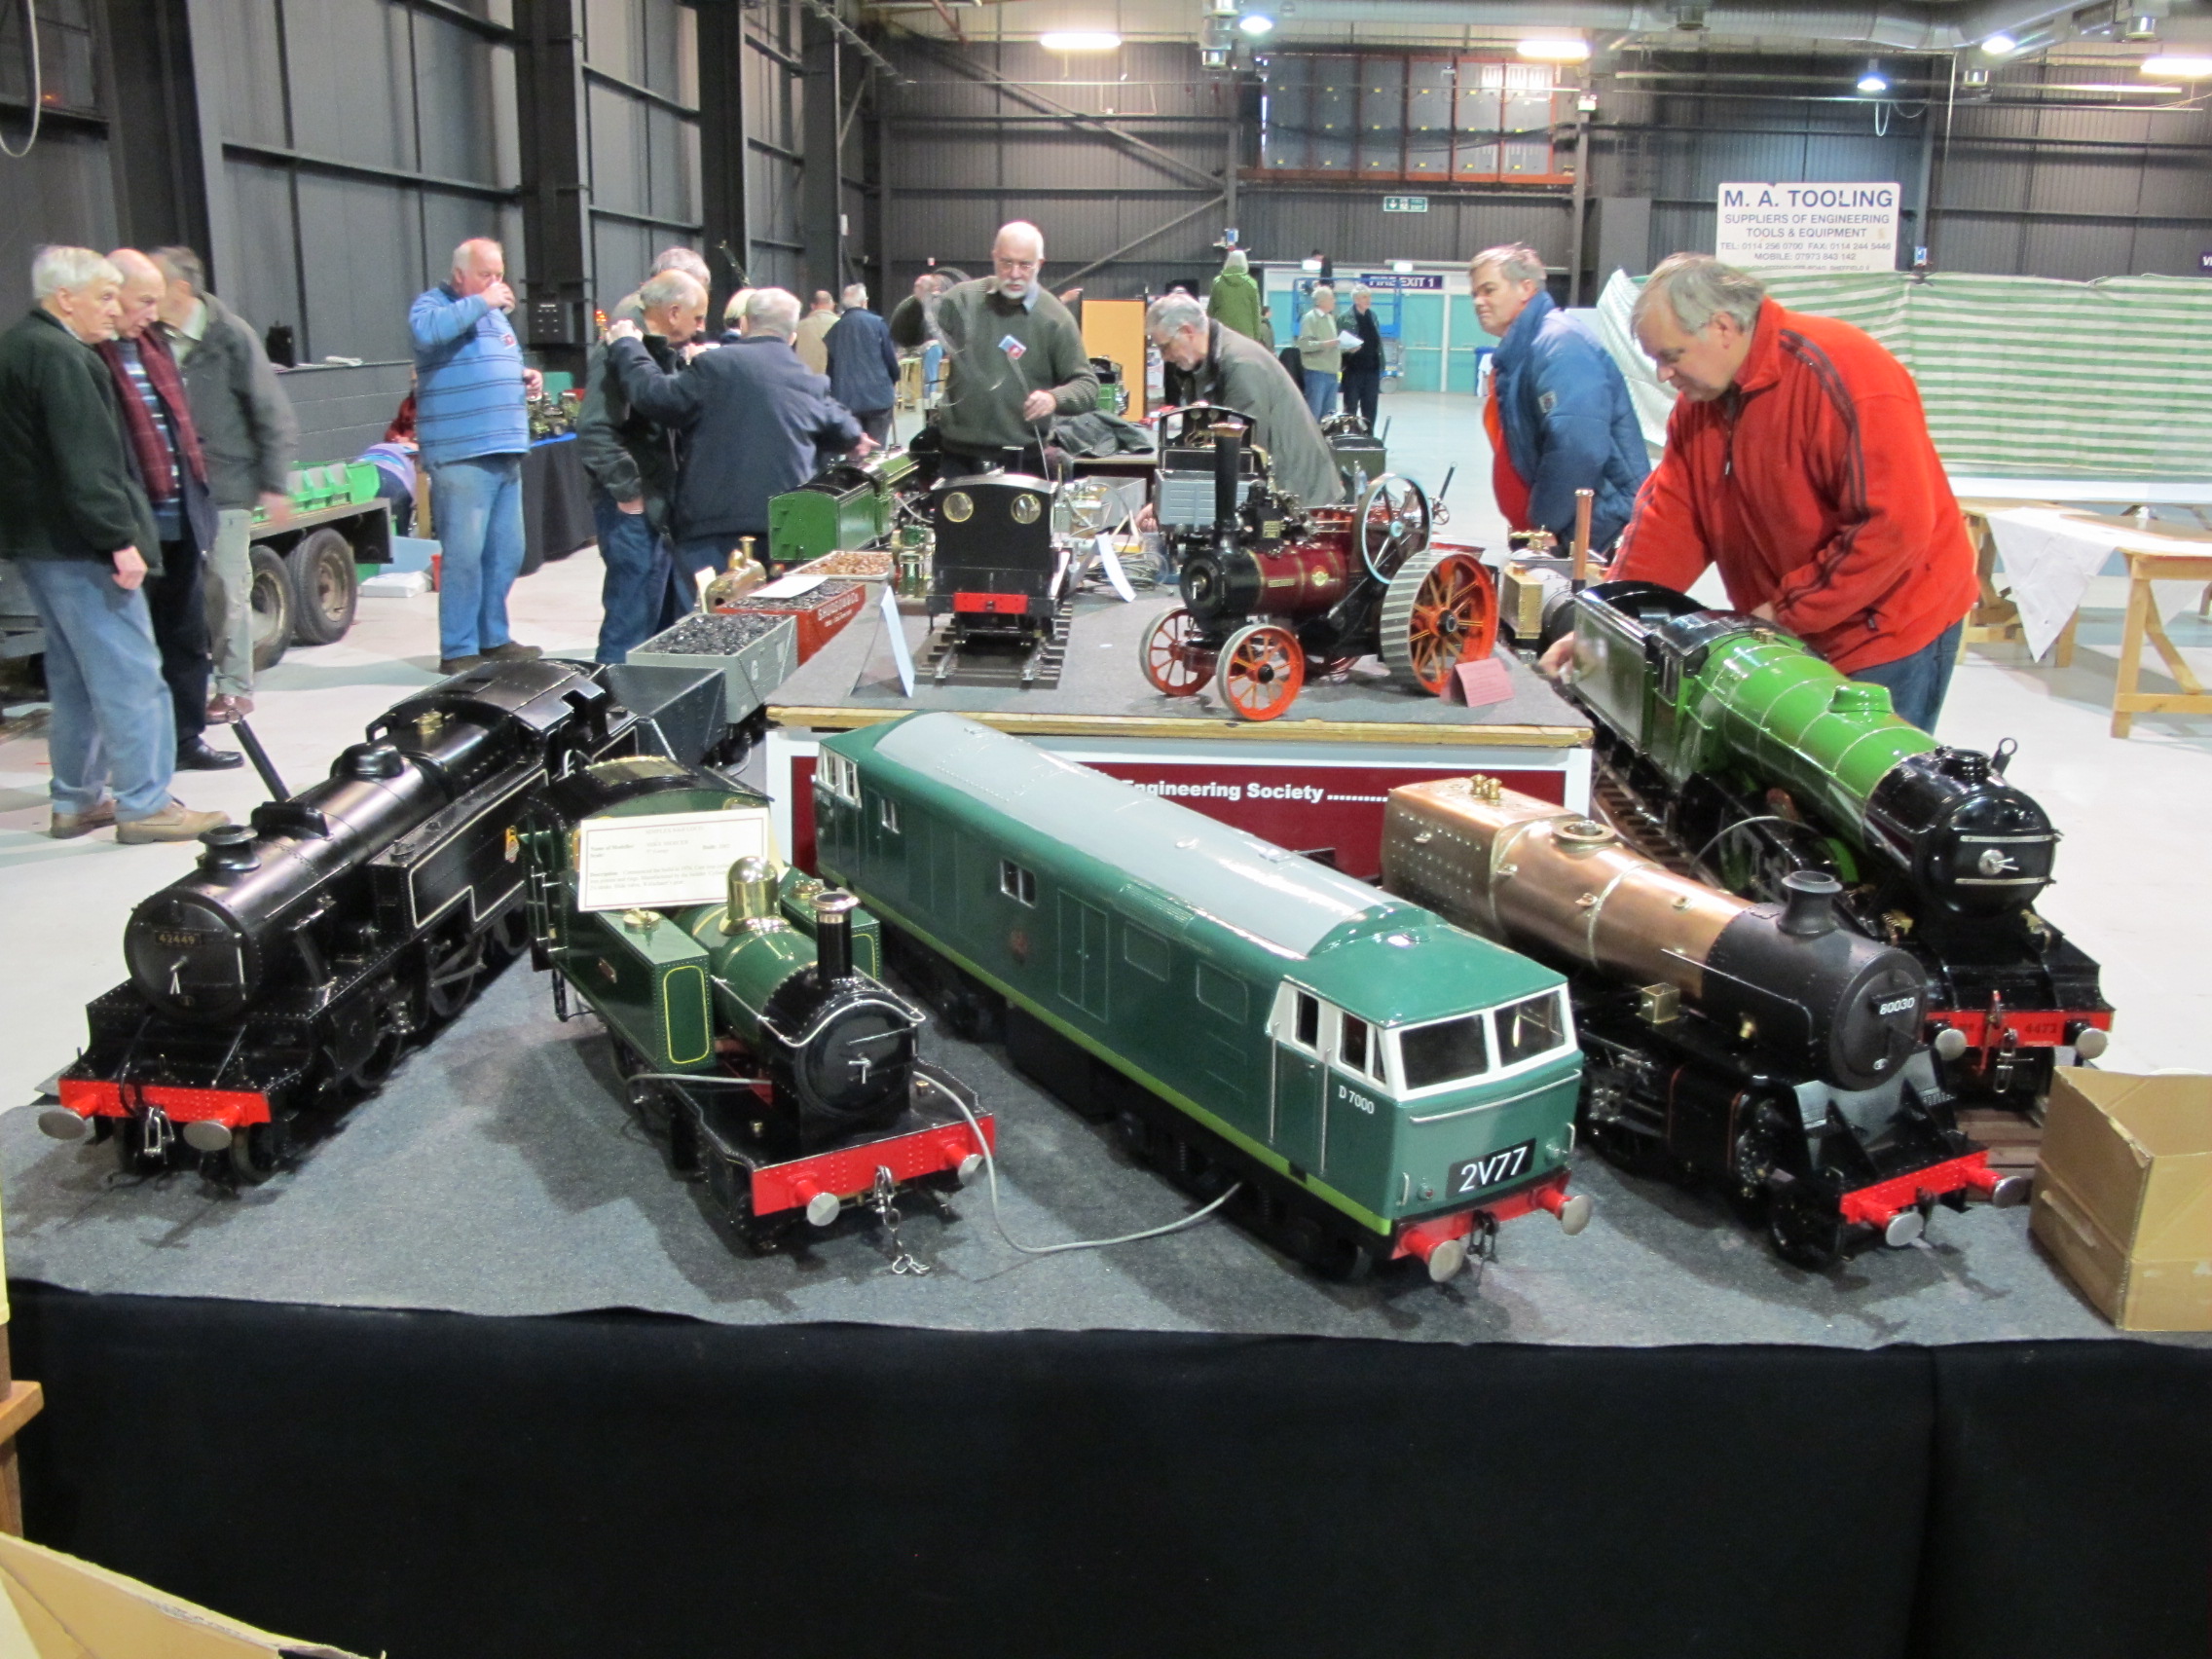 Northern Modelling Exhibition 2013